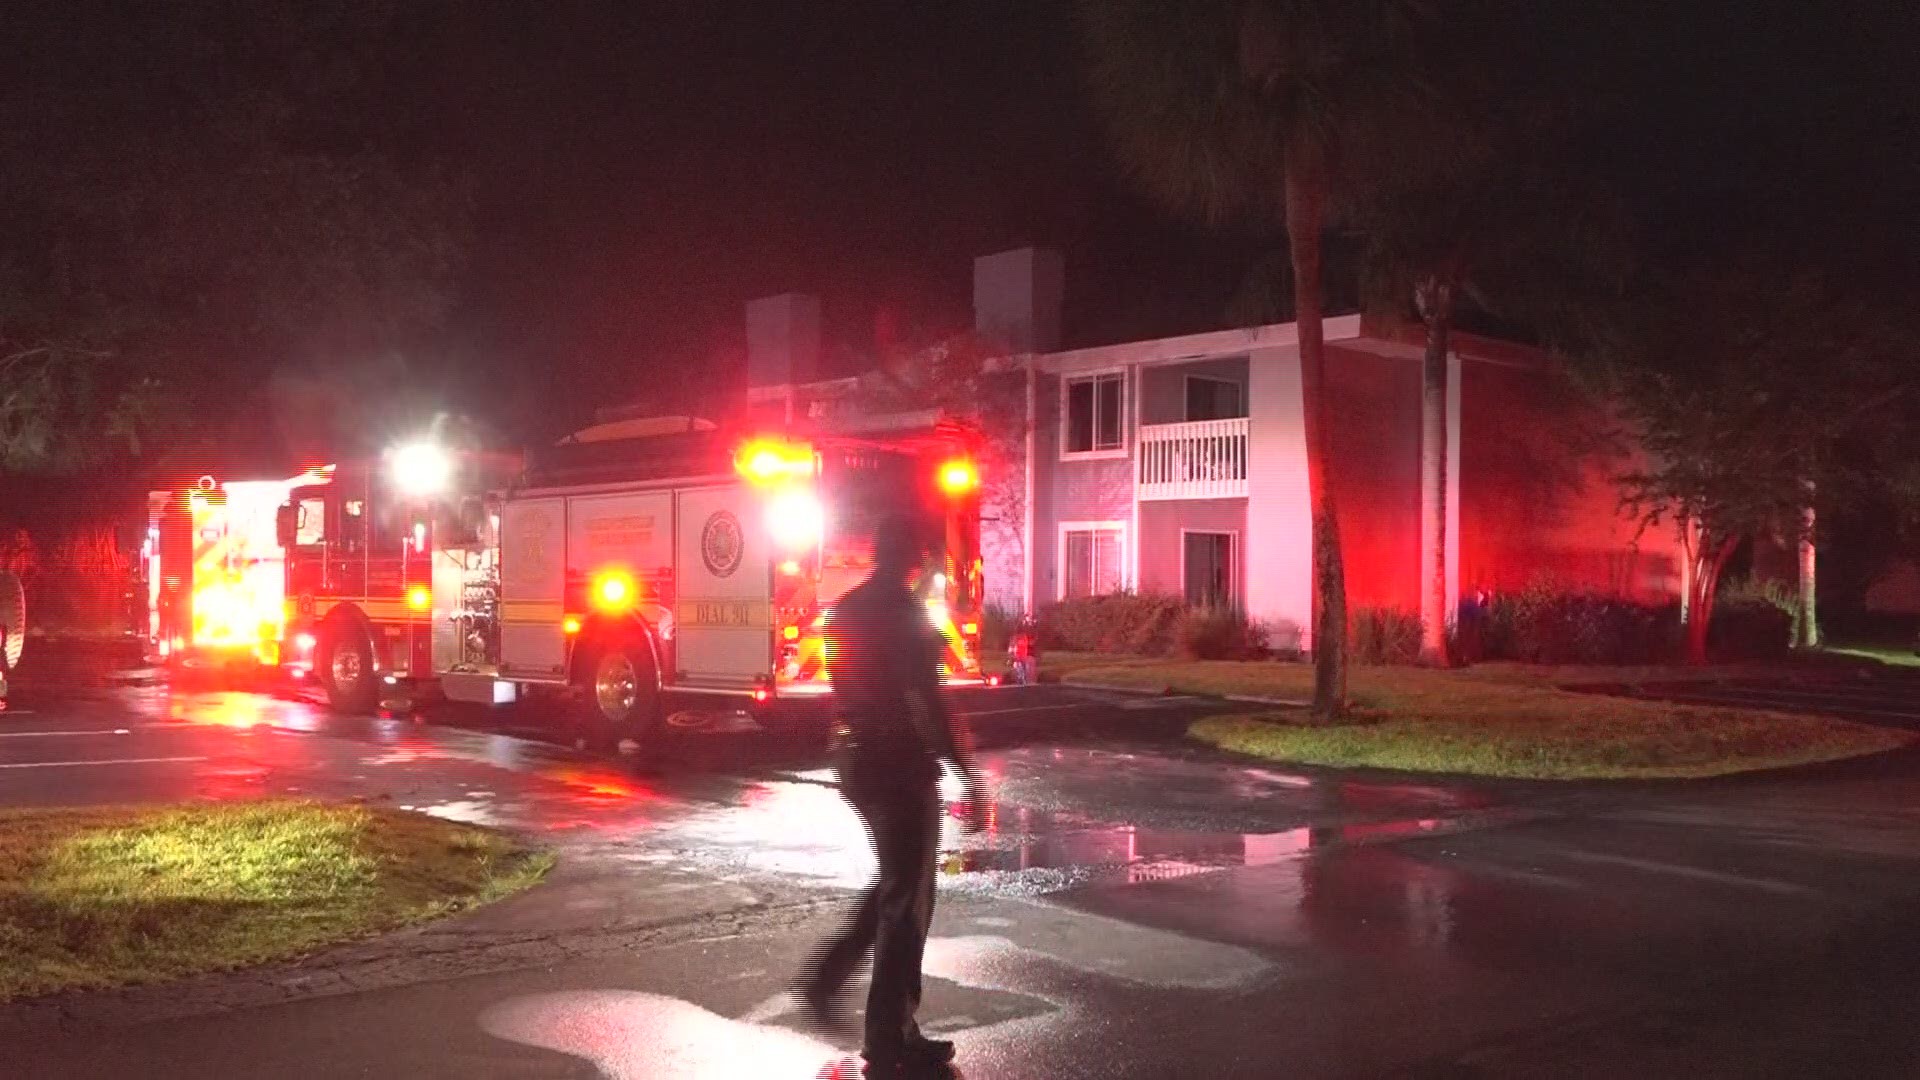 JFRD responded to an apartment fire at The Cove in Atlantic Beach just before 2 a.m. Eight adults, one child and two dogs escaped.